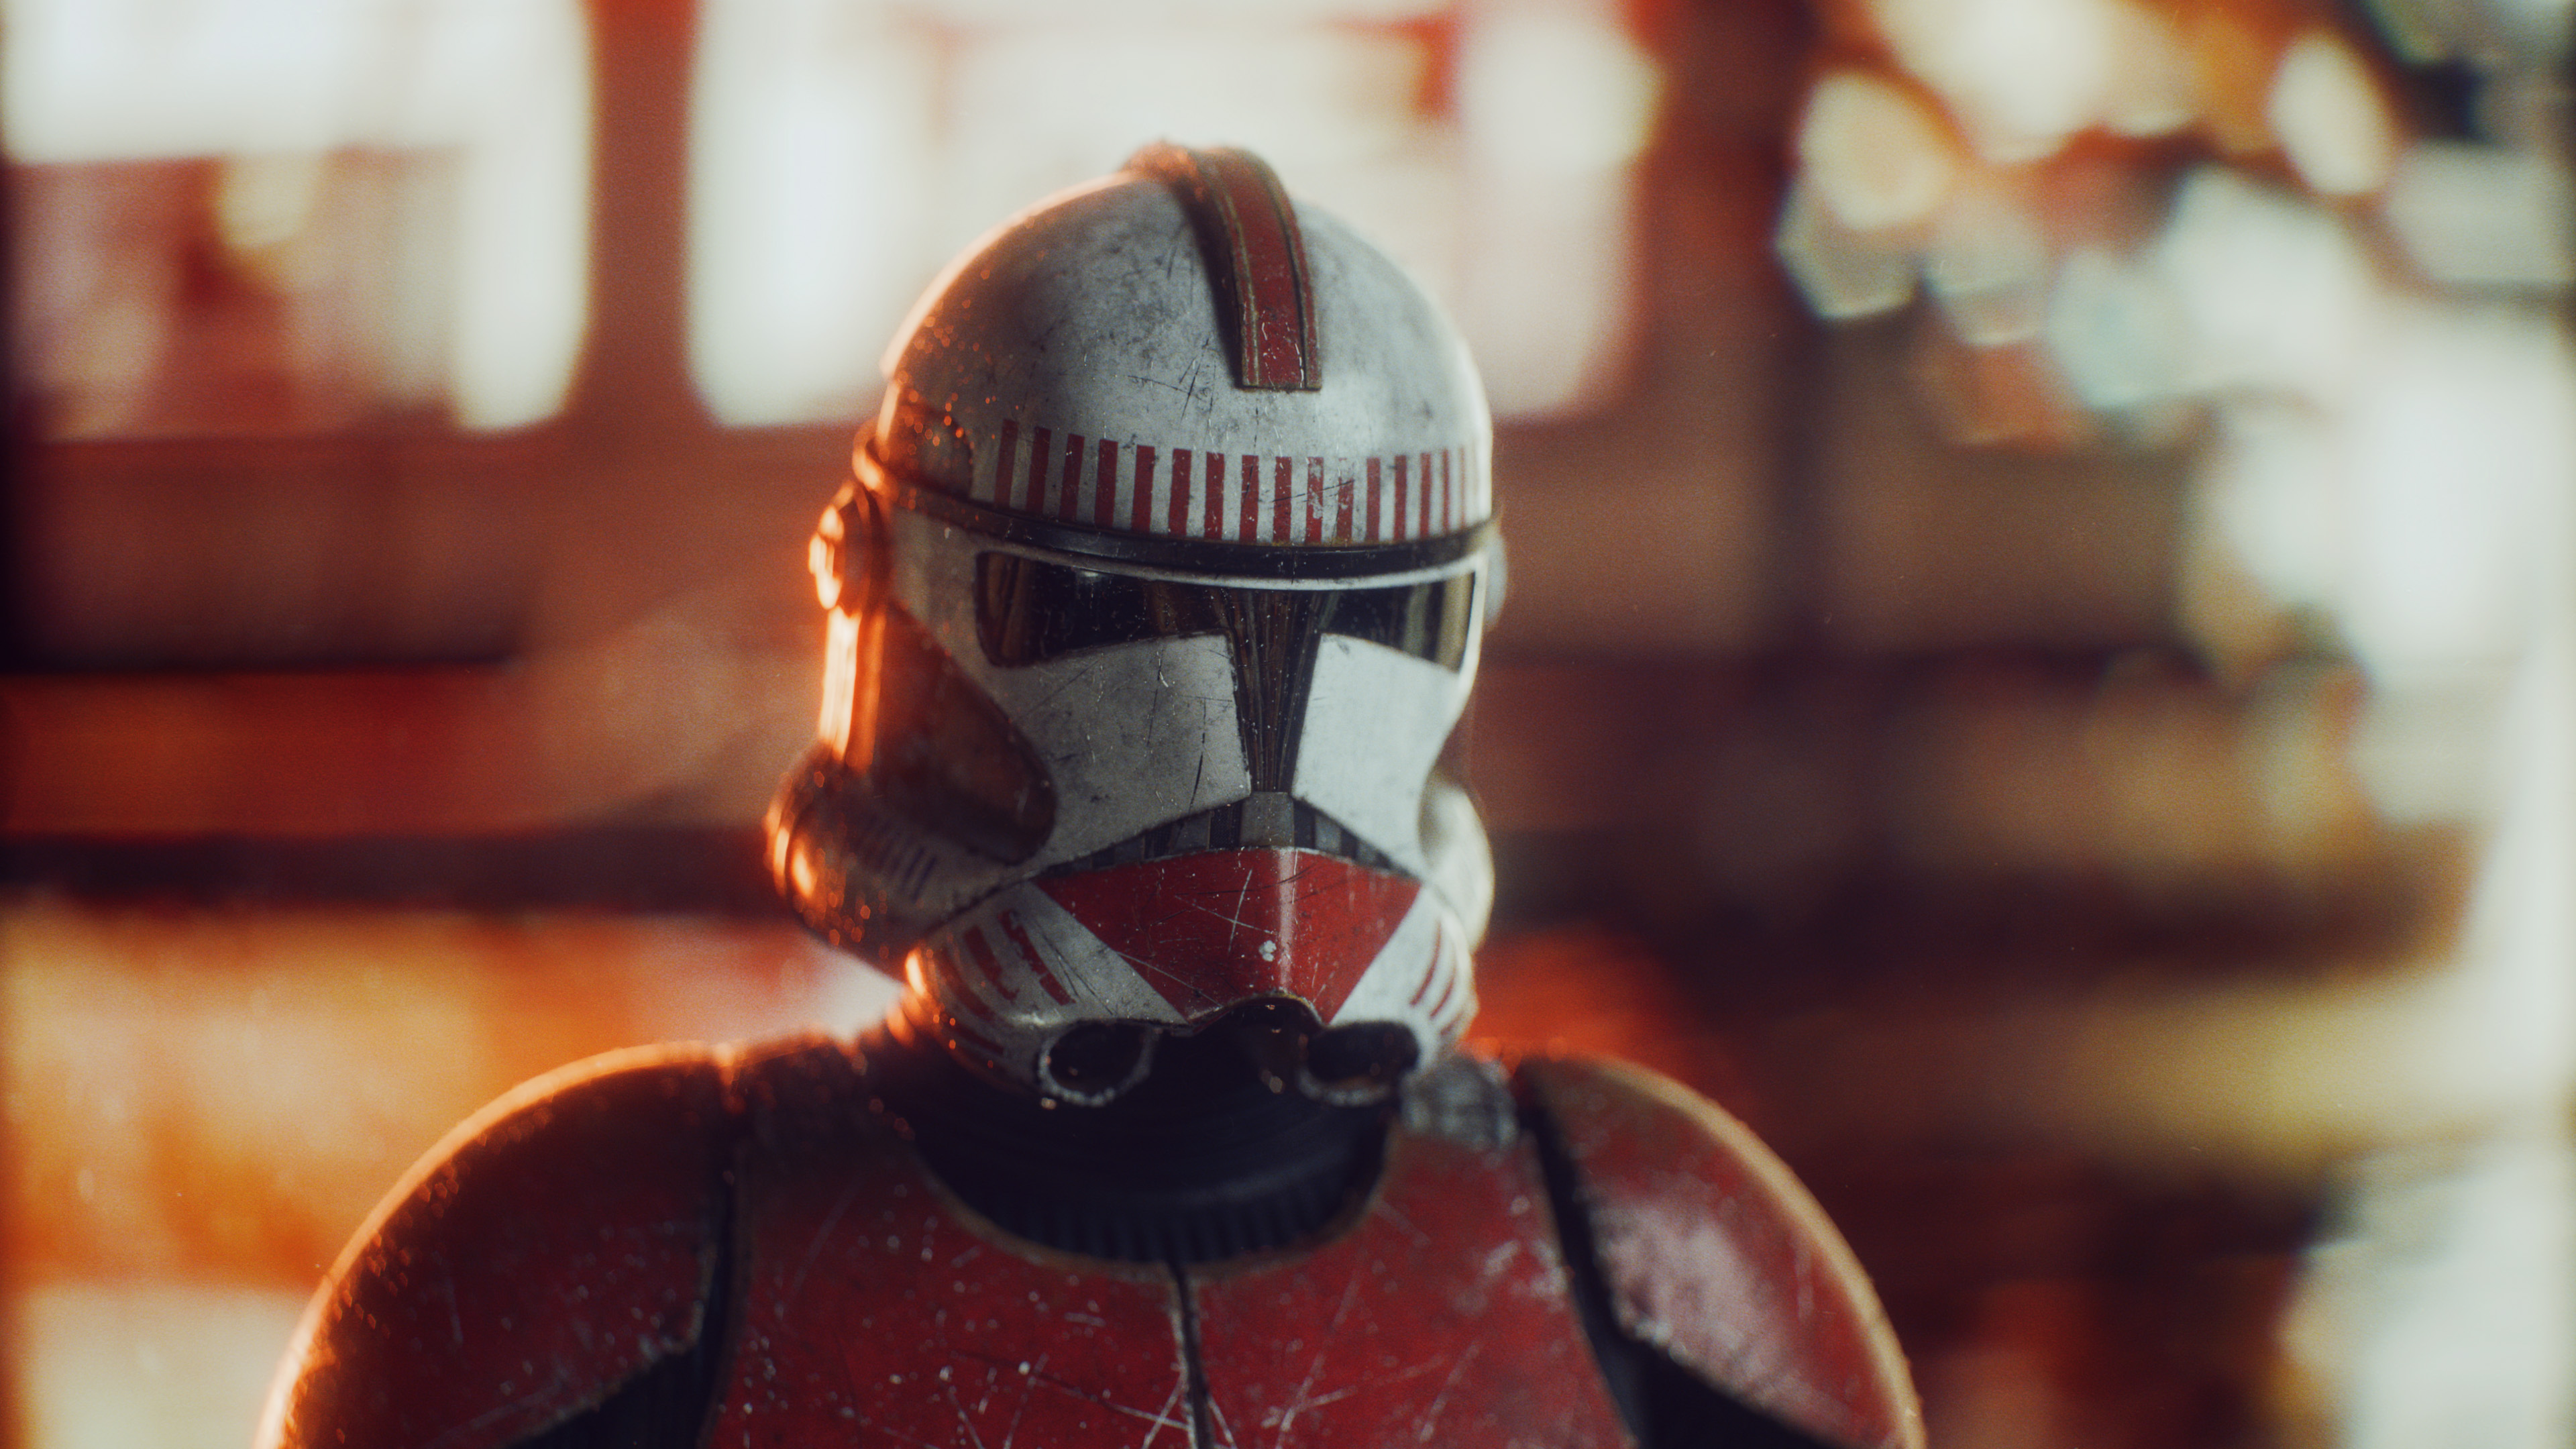 Clone Troopers iPhone Wallpapers  Wallpaper Cave